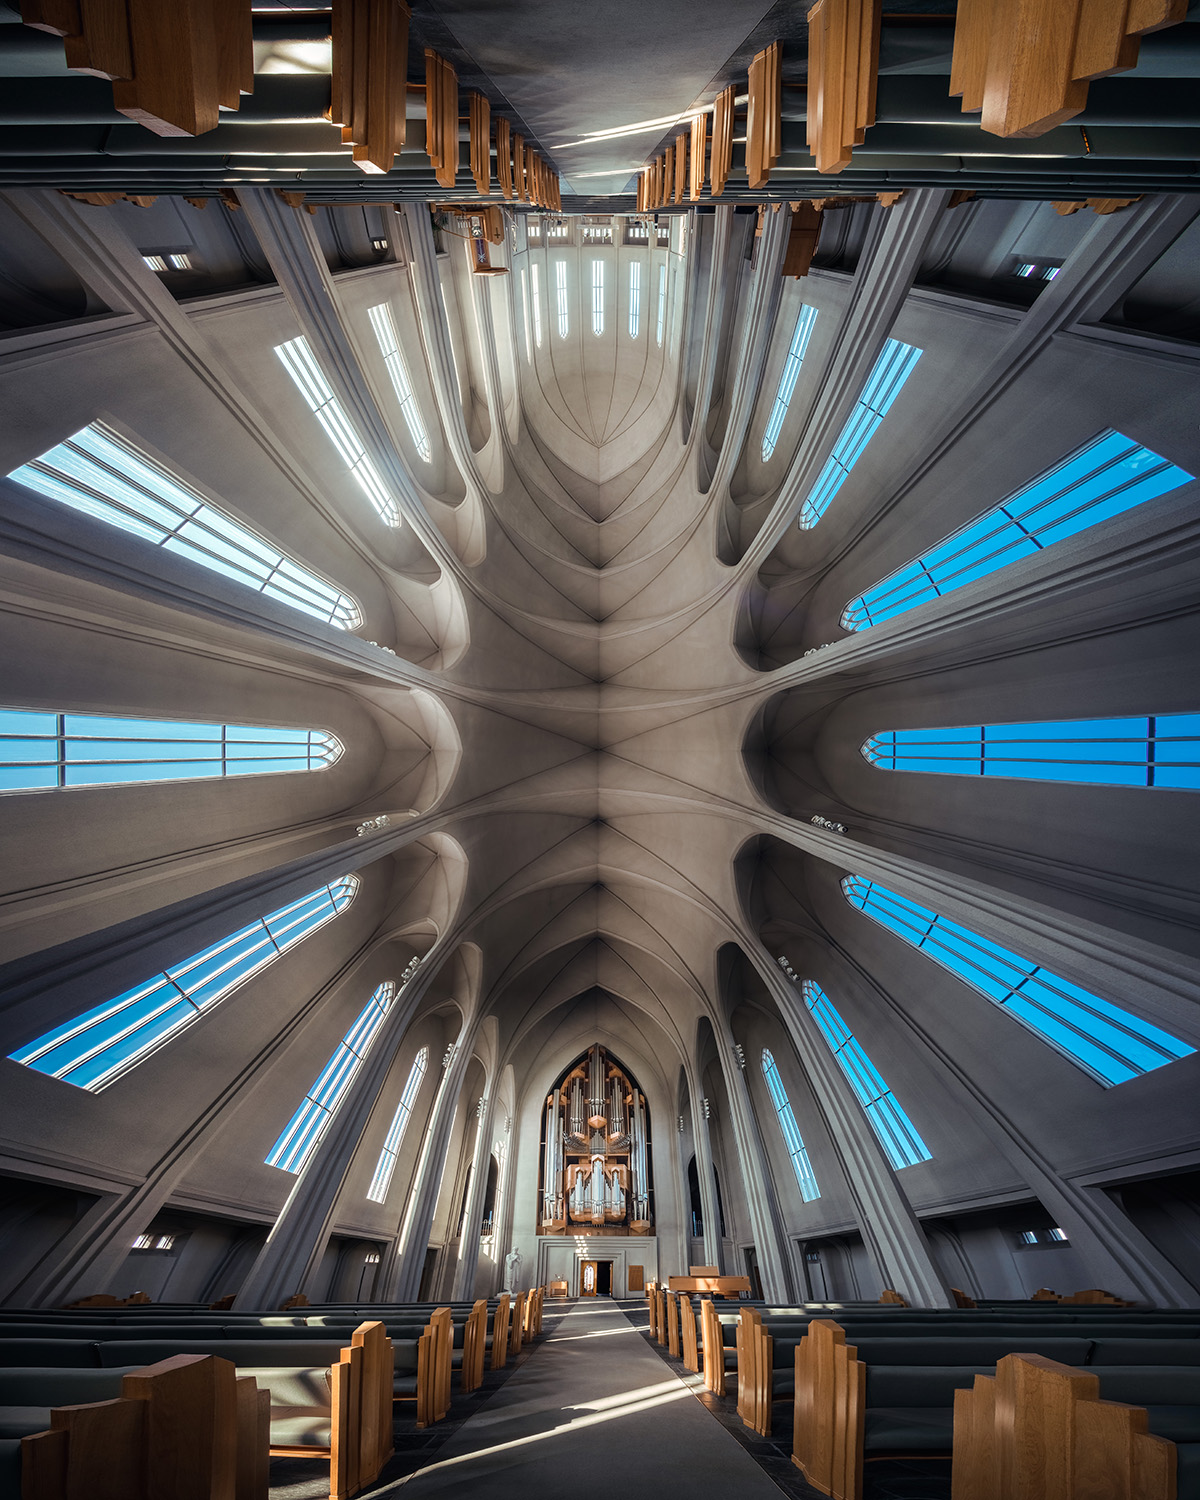 Architecture Interior Cathedral Peter Li Church Ceiling Photo Manipulation Portrait Display Symmetry 1200x1500